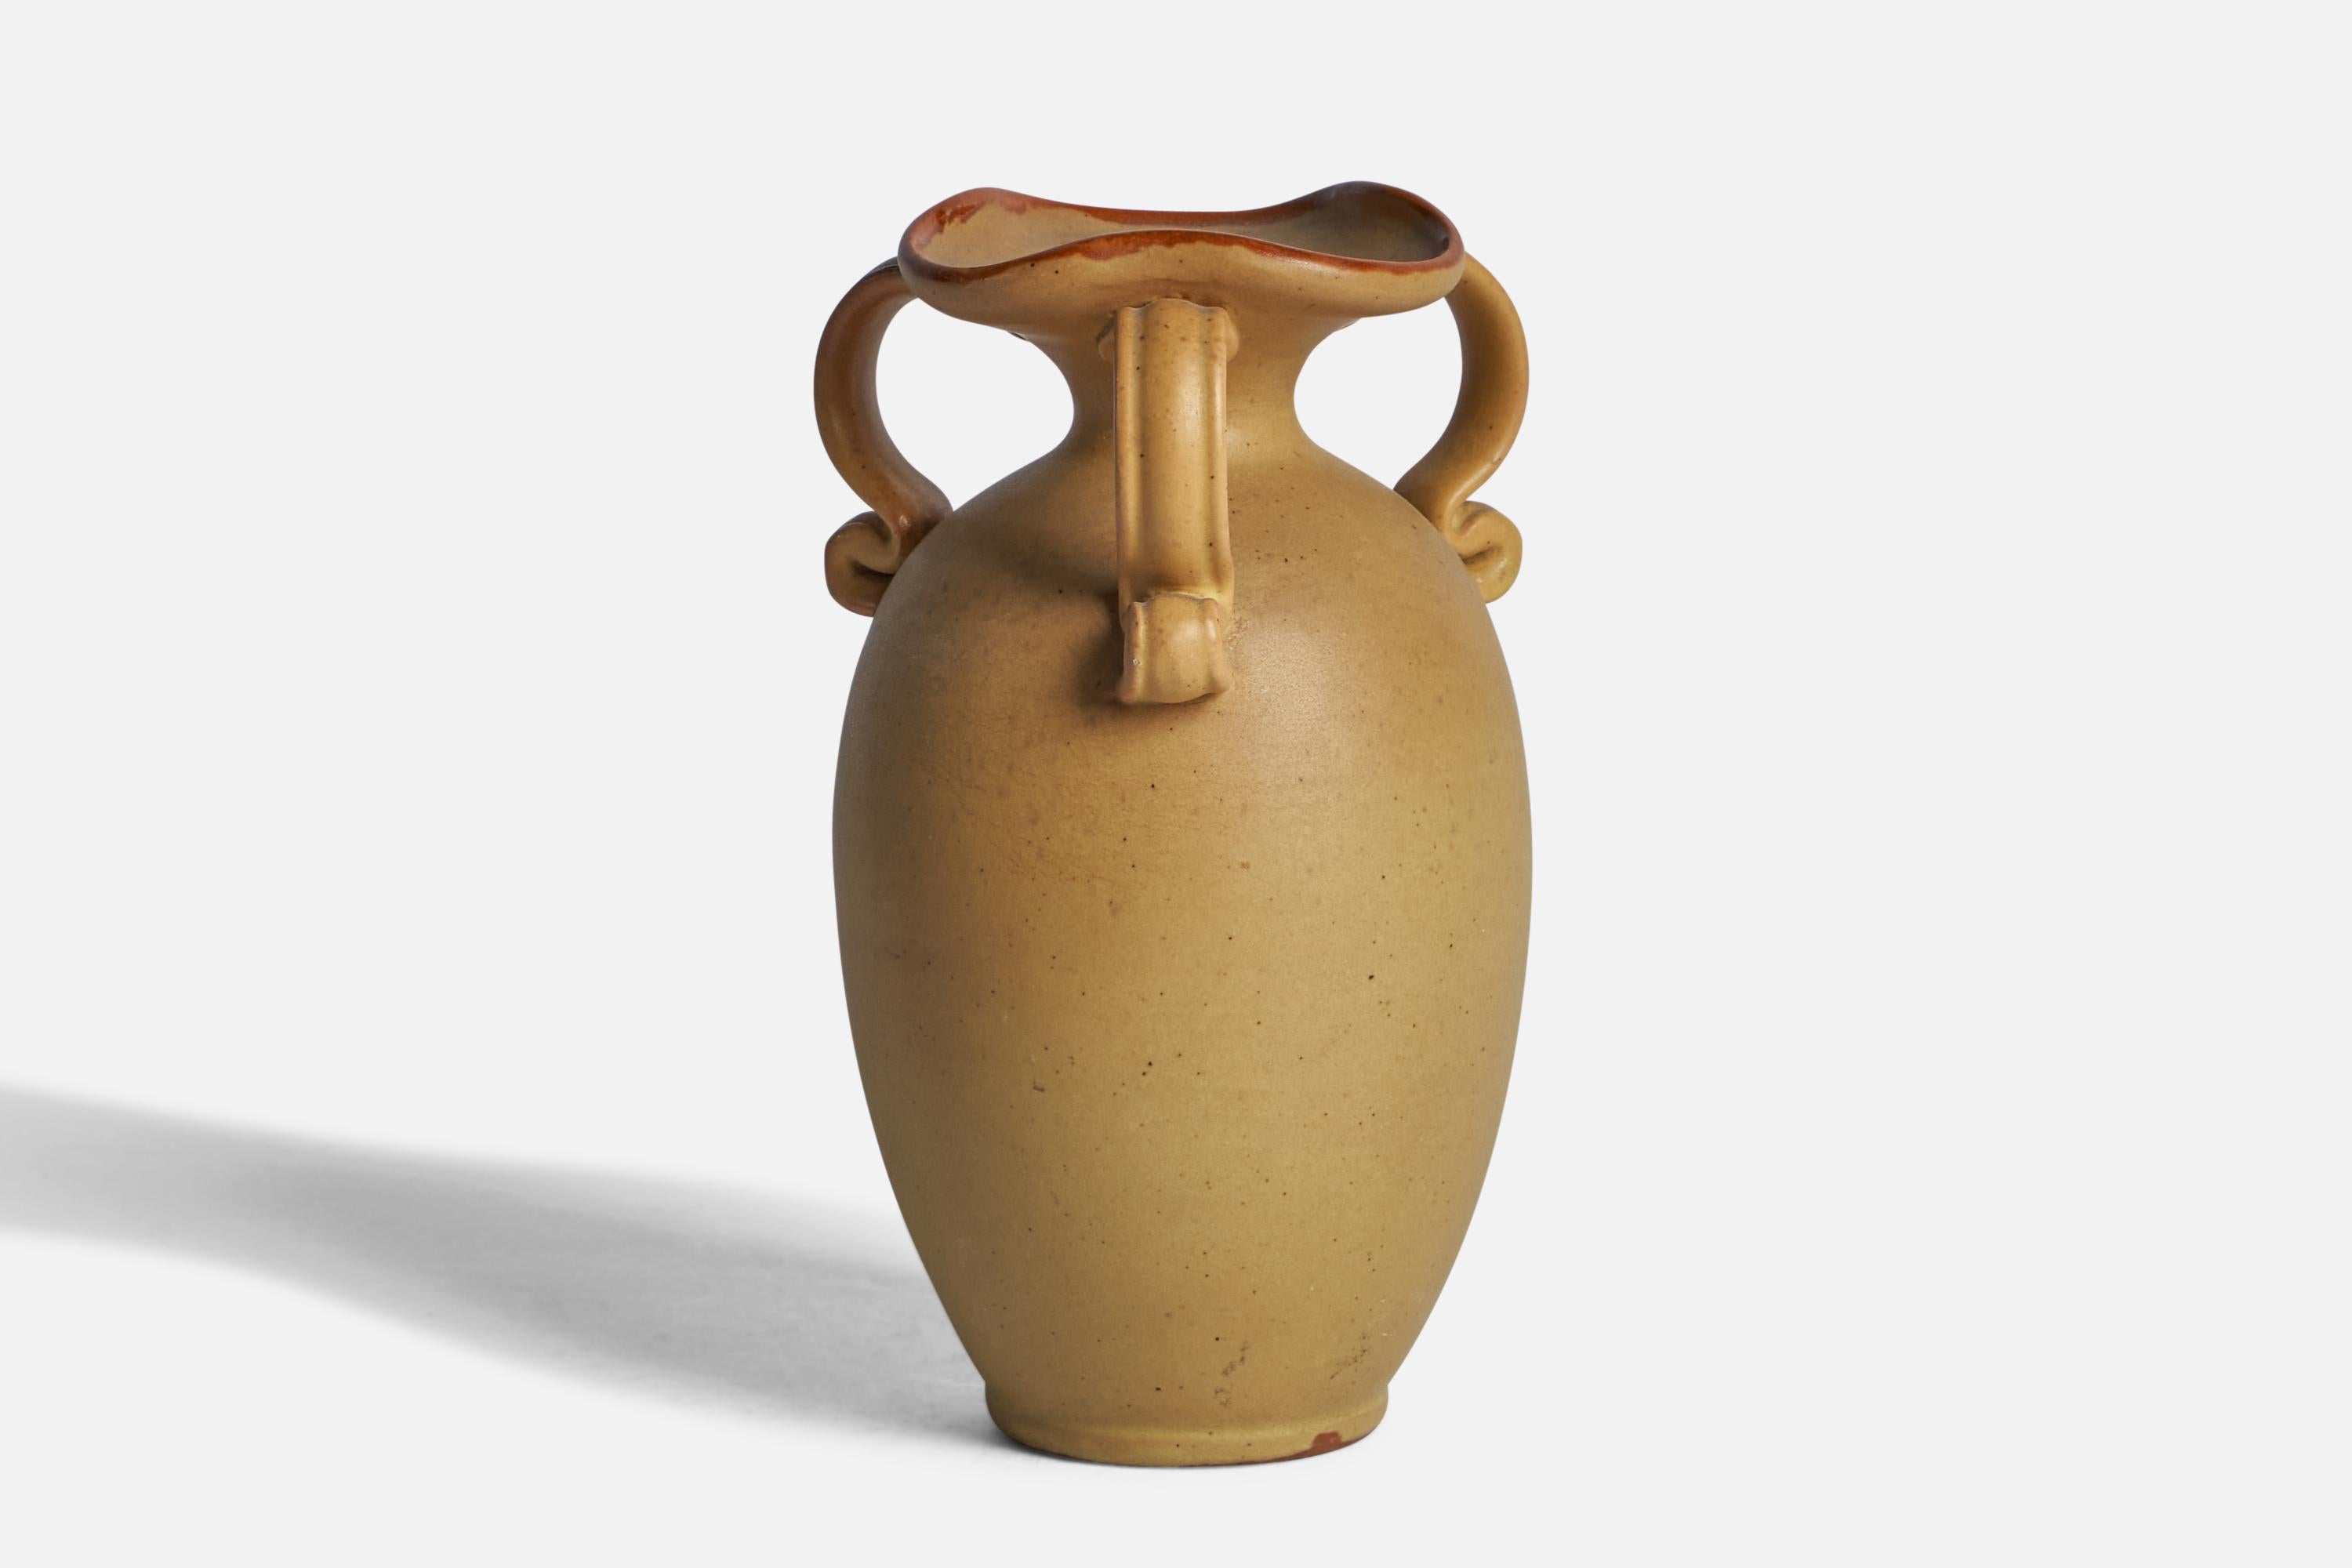 A yellow and brown-glazed earthenware vase designed and produced by Gabriel Keramik, Sweden, 1930s.